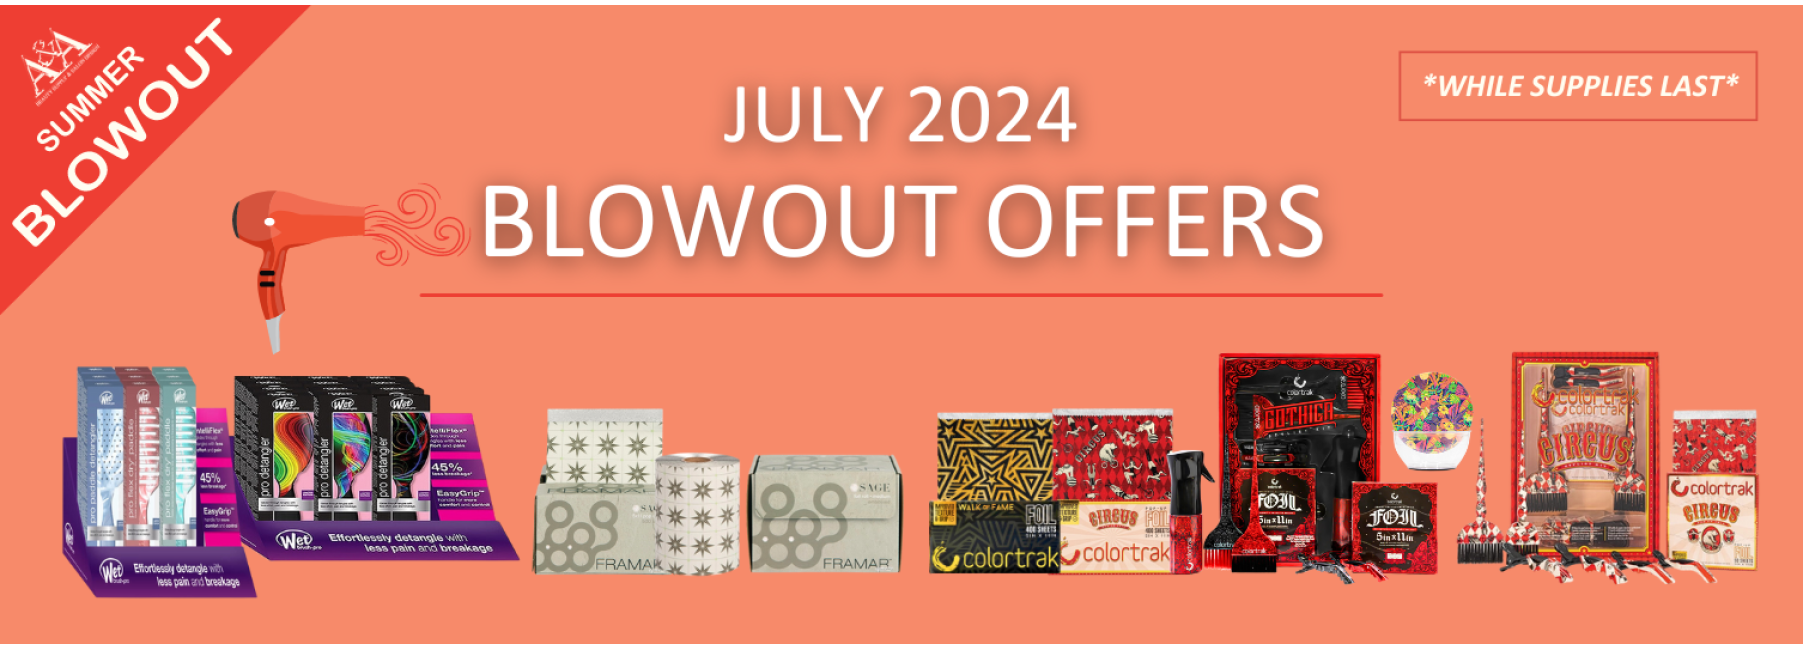 JULY BLOWOUT OFFERS BANNER 2024